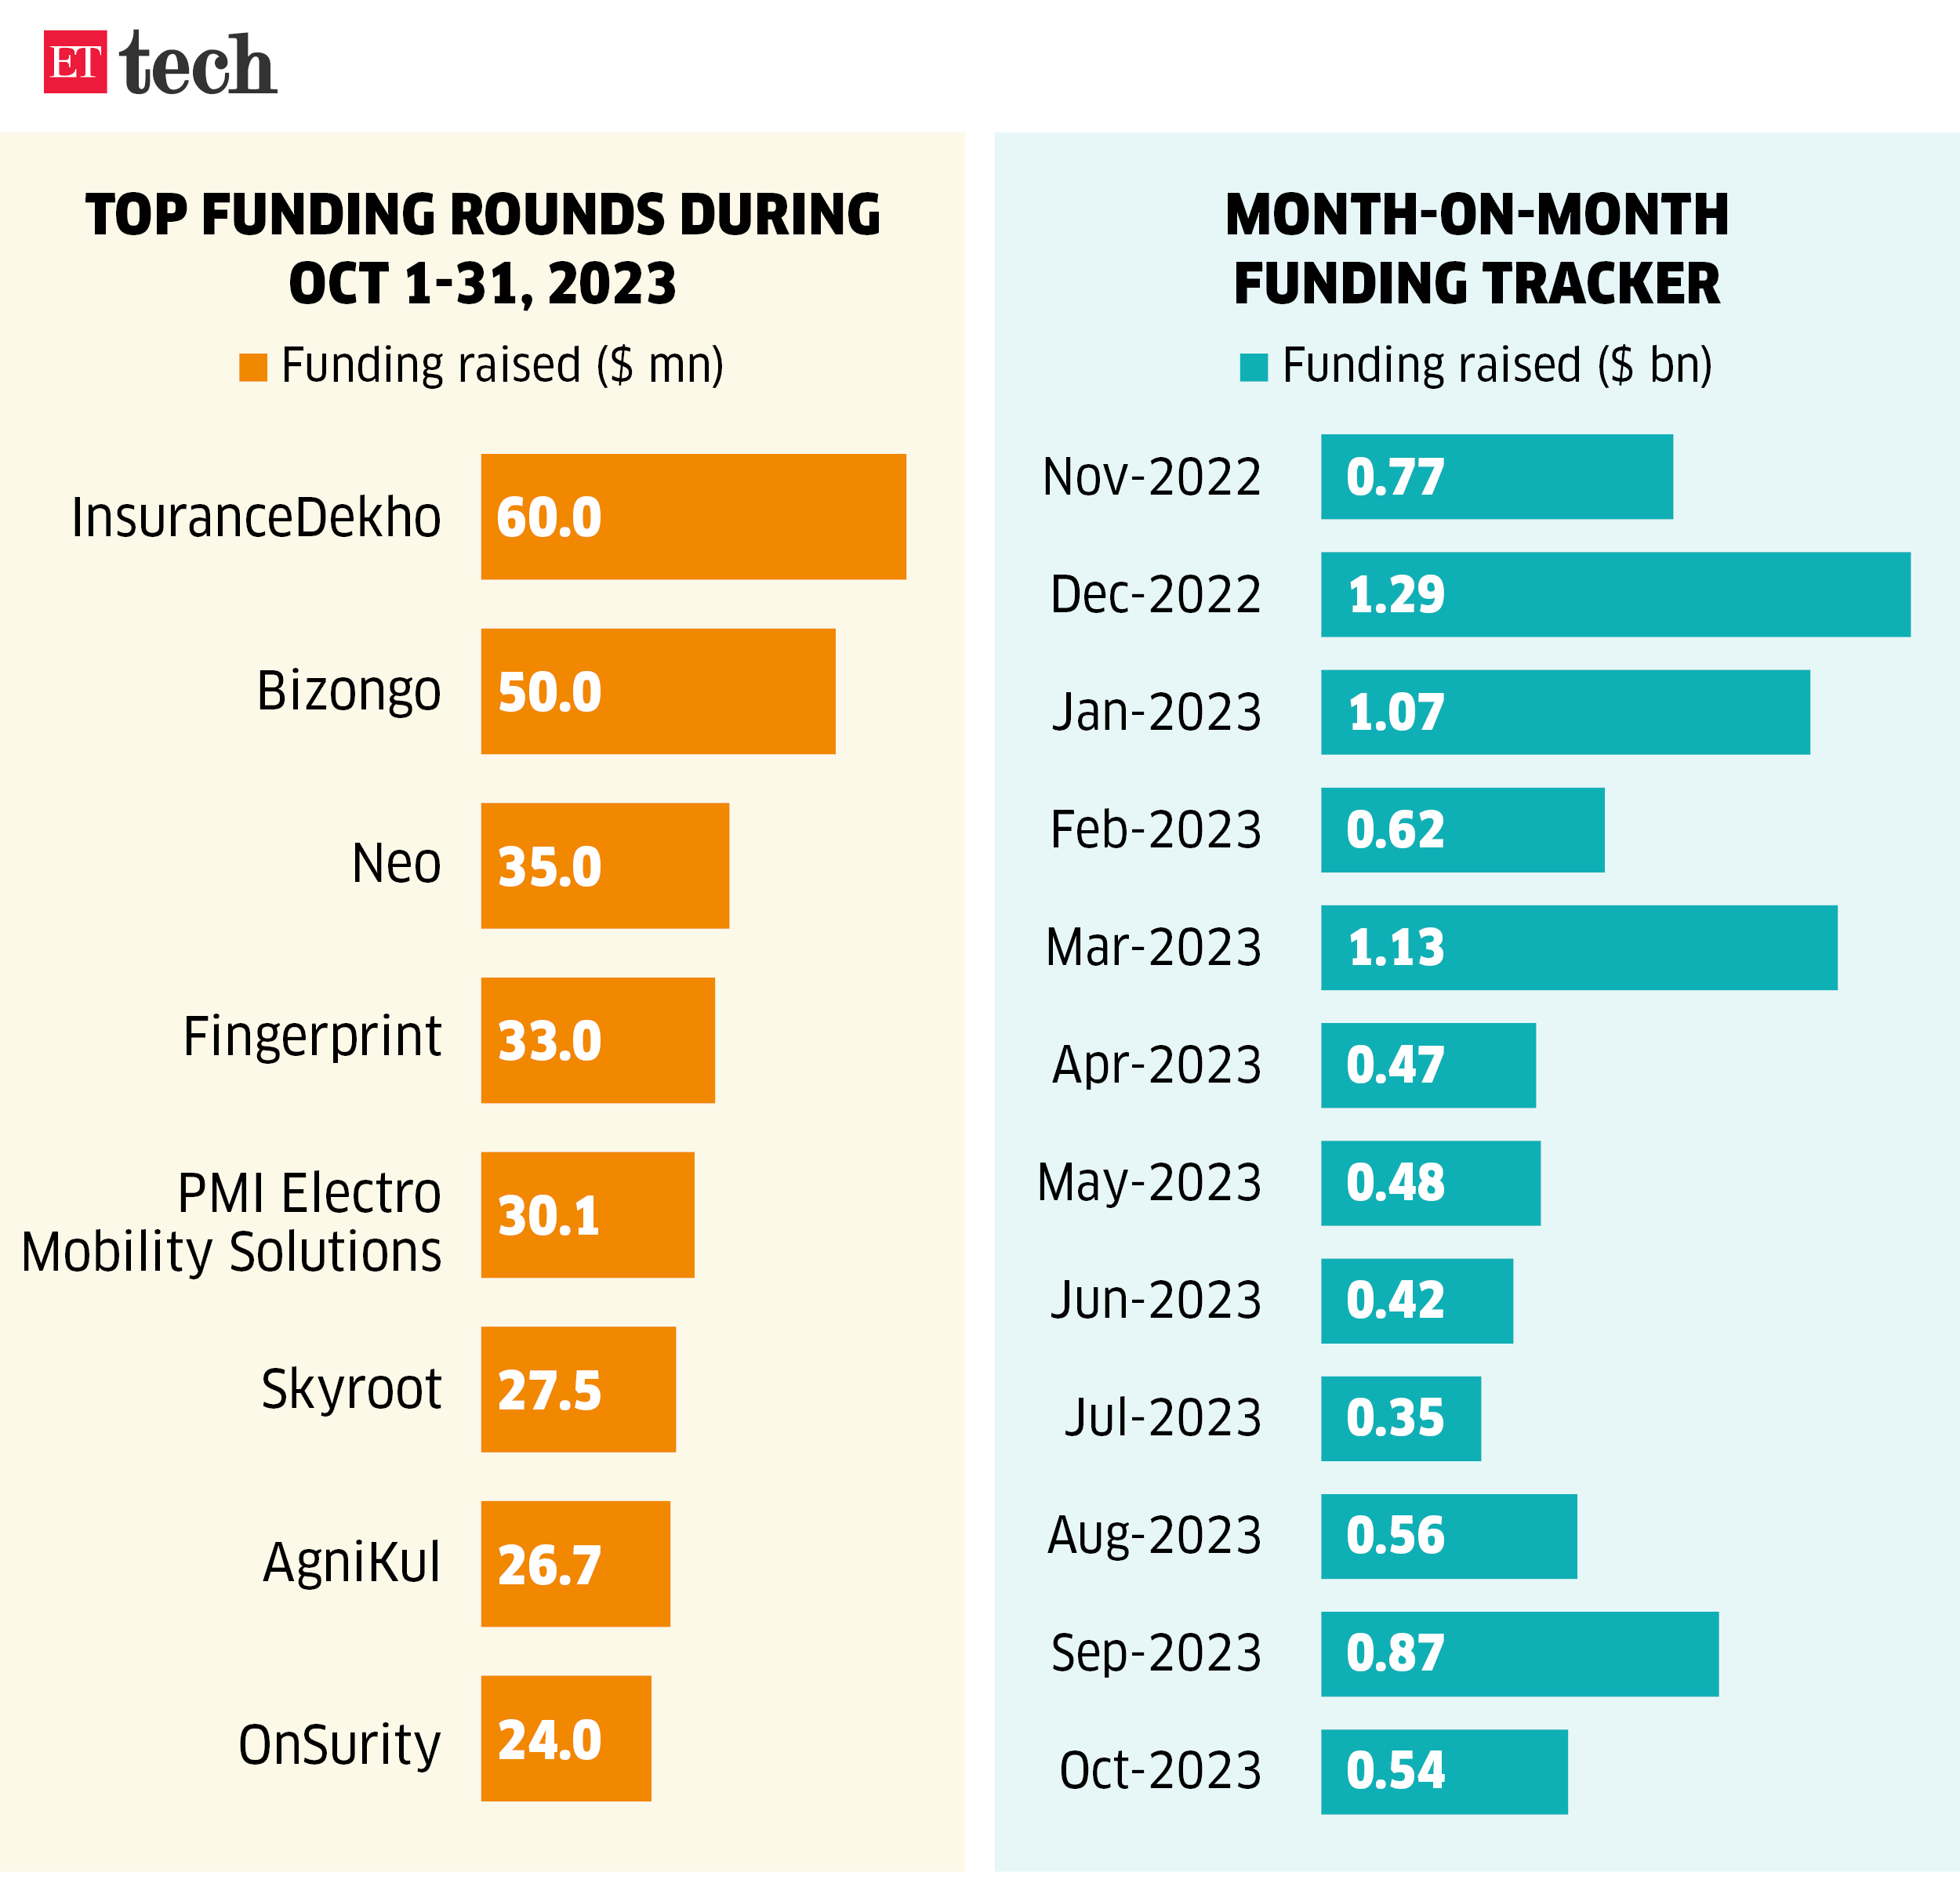 Top funding rounds during_1- 31 Oct, 2023_ETTECH